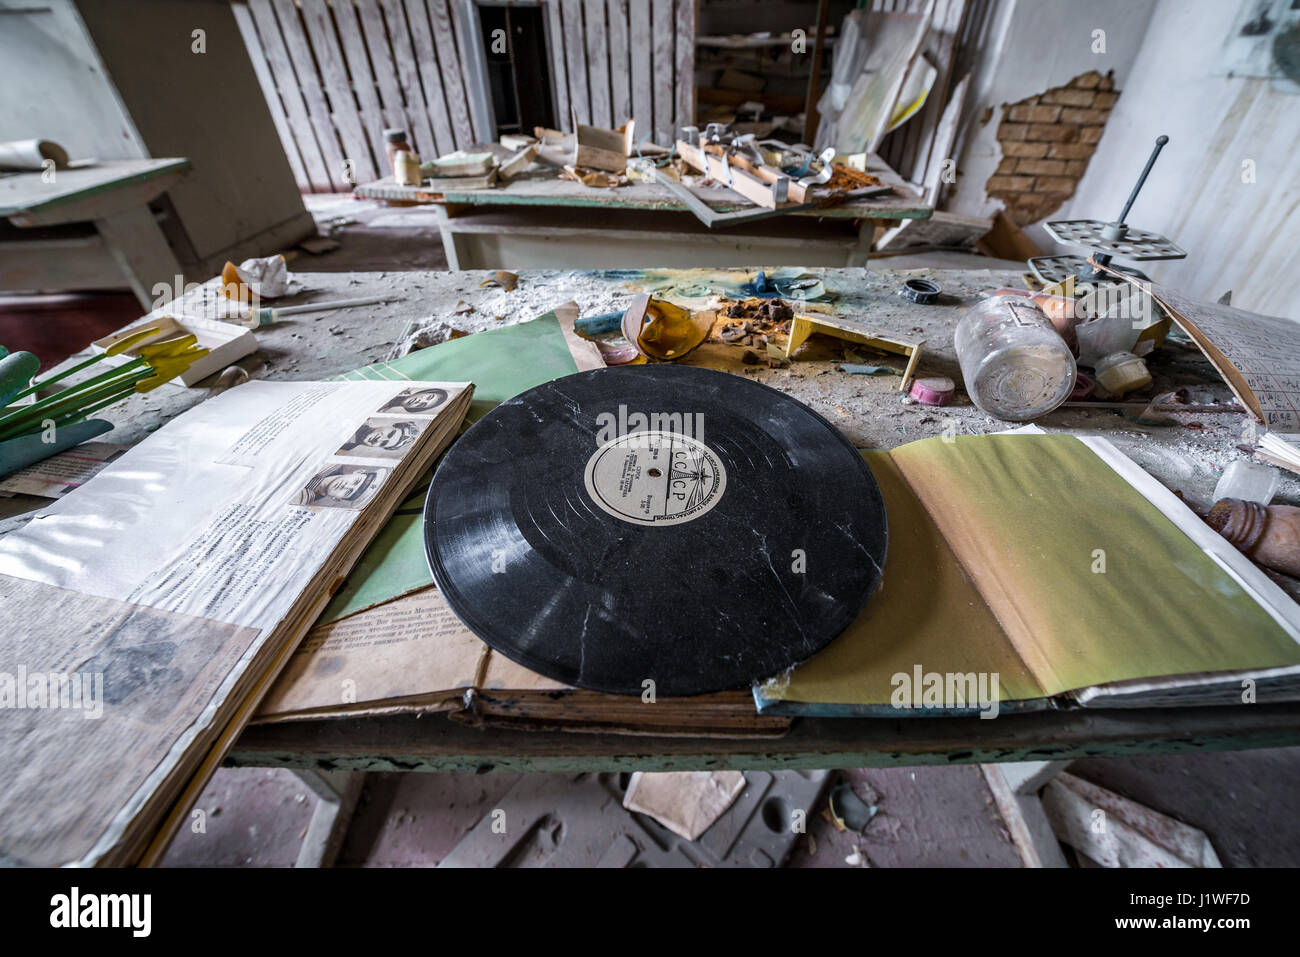 Old vinyl record in secondary school in Mashevo abandoned village of  Chernobyl Nuclear Power Plant Zone of Alienation in Ukraine Stock Photo -  Alamy